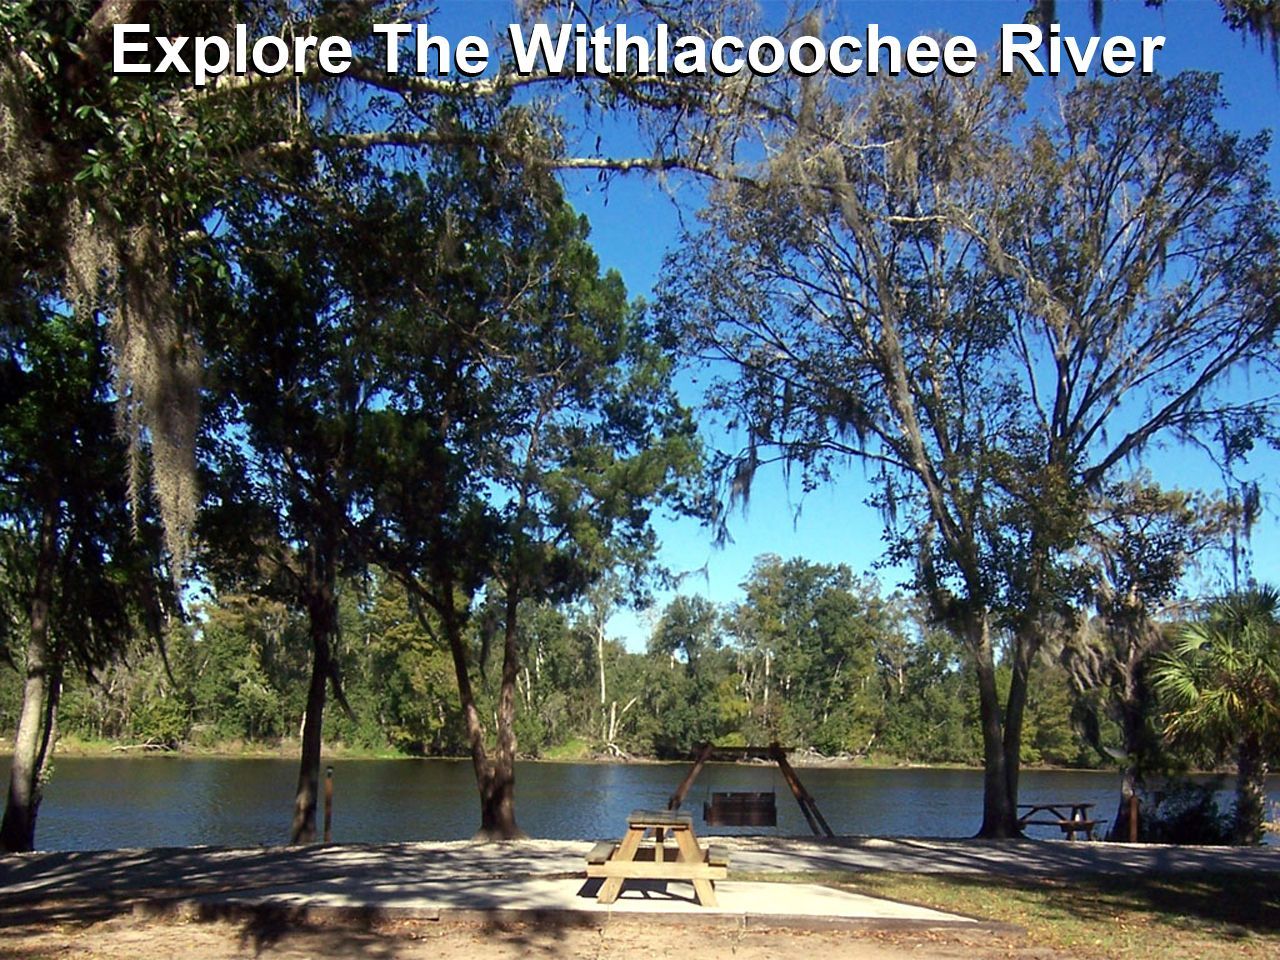 a picture of a river with the caption explore the withlacoochee river